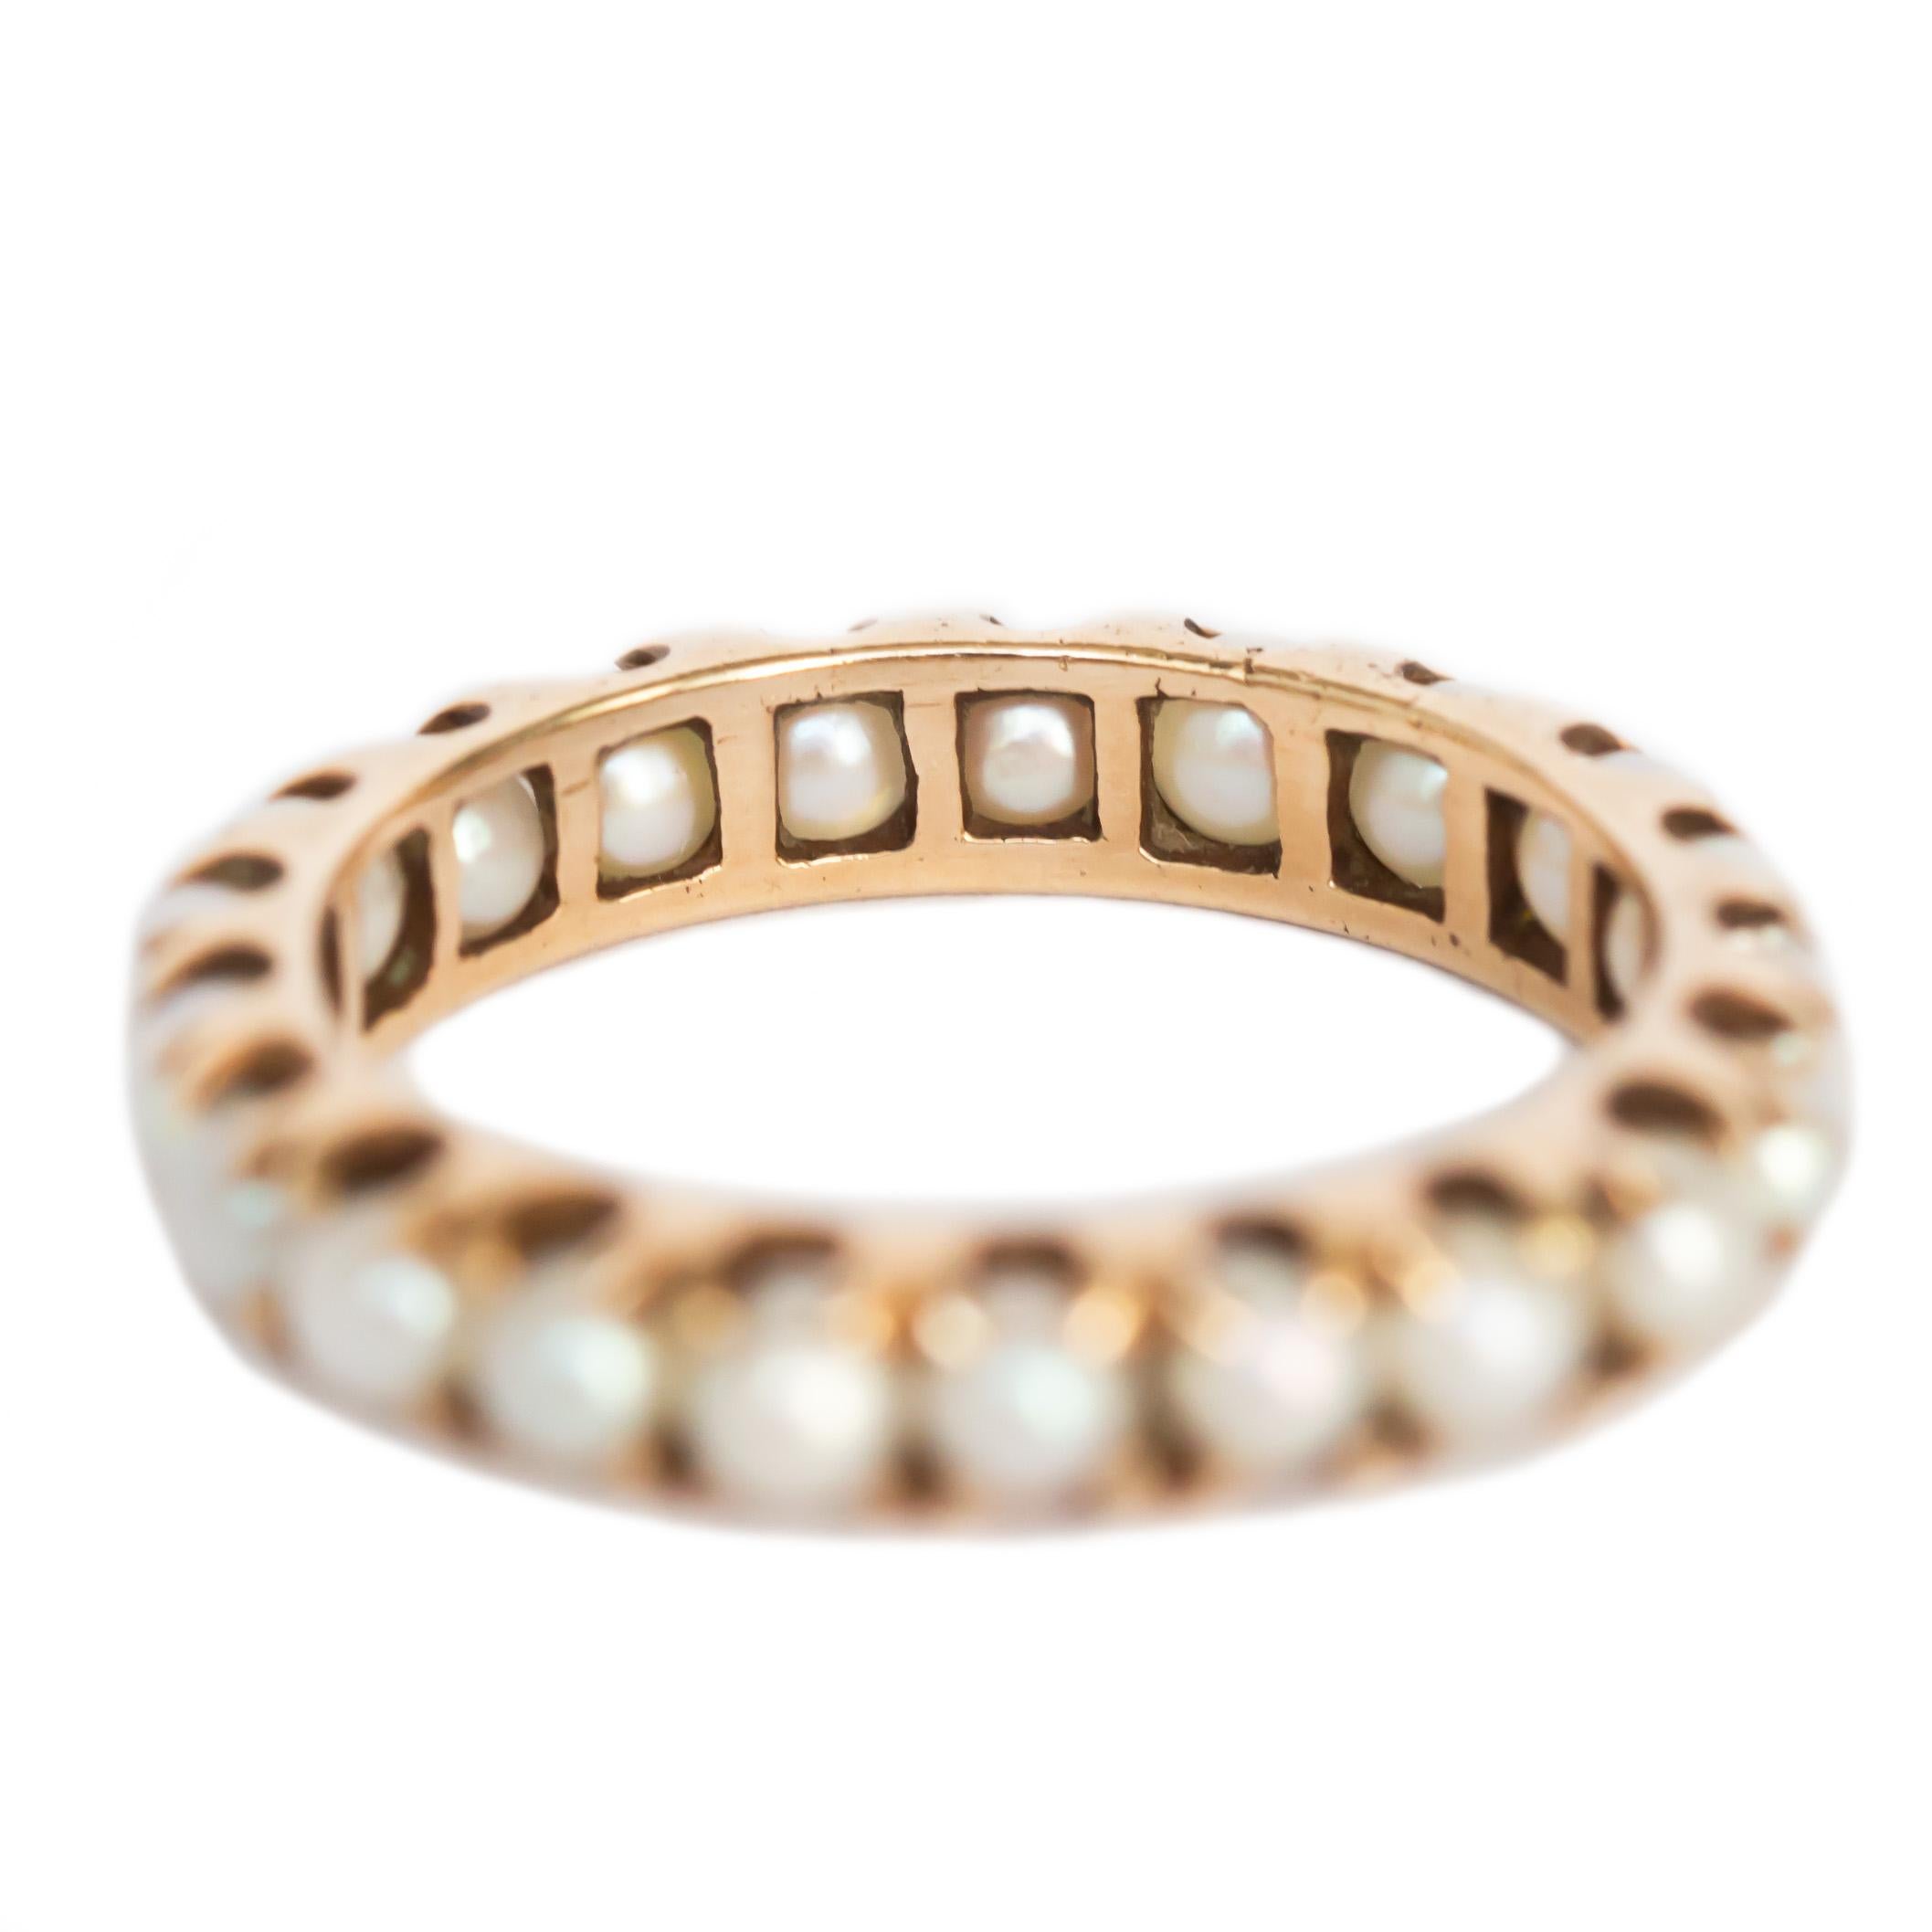 Ring Size: 5.25
Metal Type: 14 karat Yellow Gold 
Weight: 2.3 grams

Stone Details: 
Shape: Natural Seed Pearls 
Total Carat Weight: 2.00 carat total weight
Top Luster 

Finger to Top of Stone Measurement: 2.65mm
Width: 3.65mm